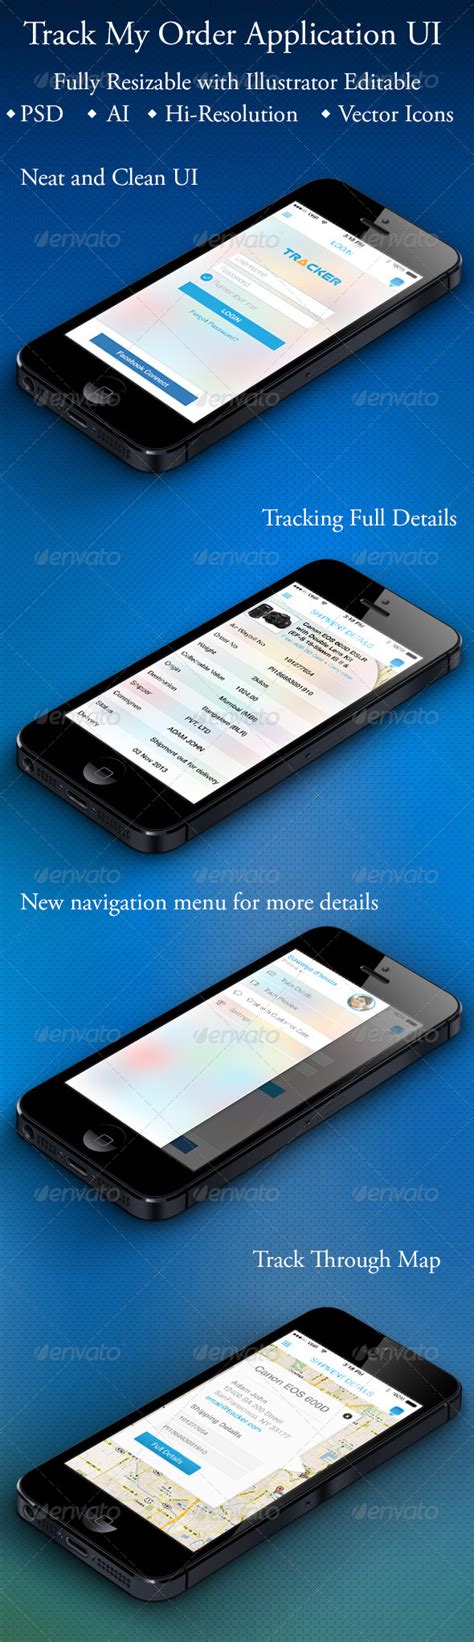 It said the estimated delivery date was today. Track My Order Application by harishreddyv4 | GraphicRiver